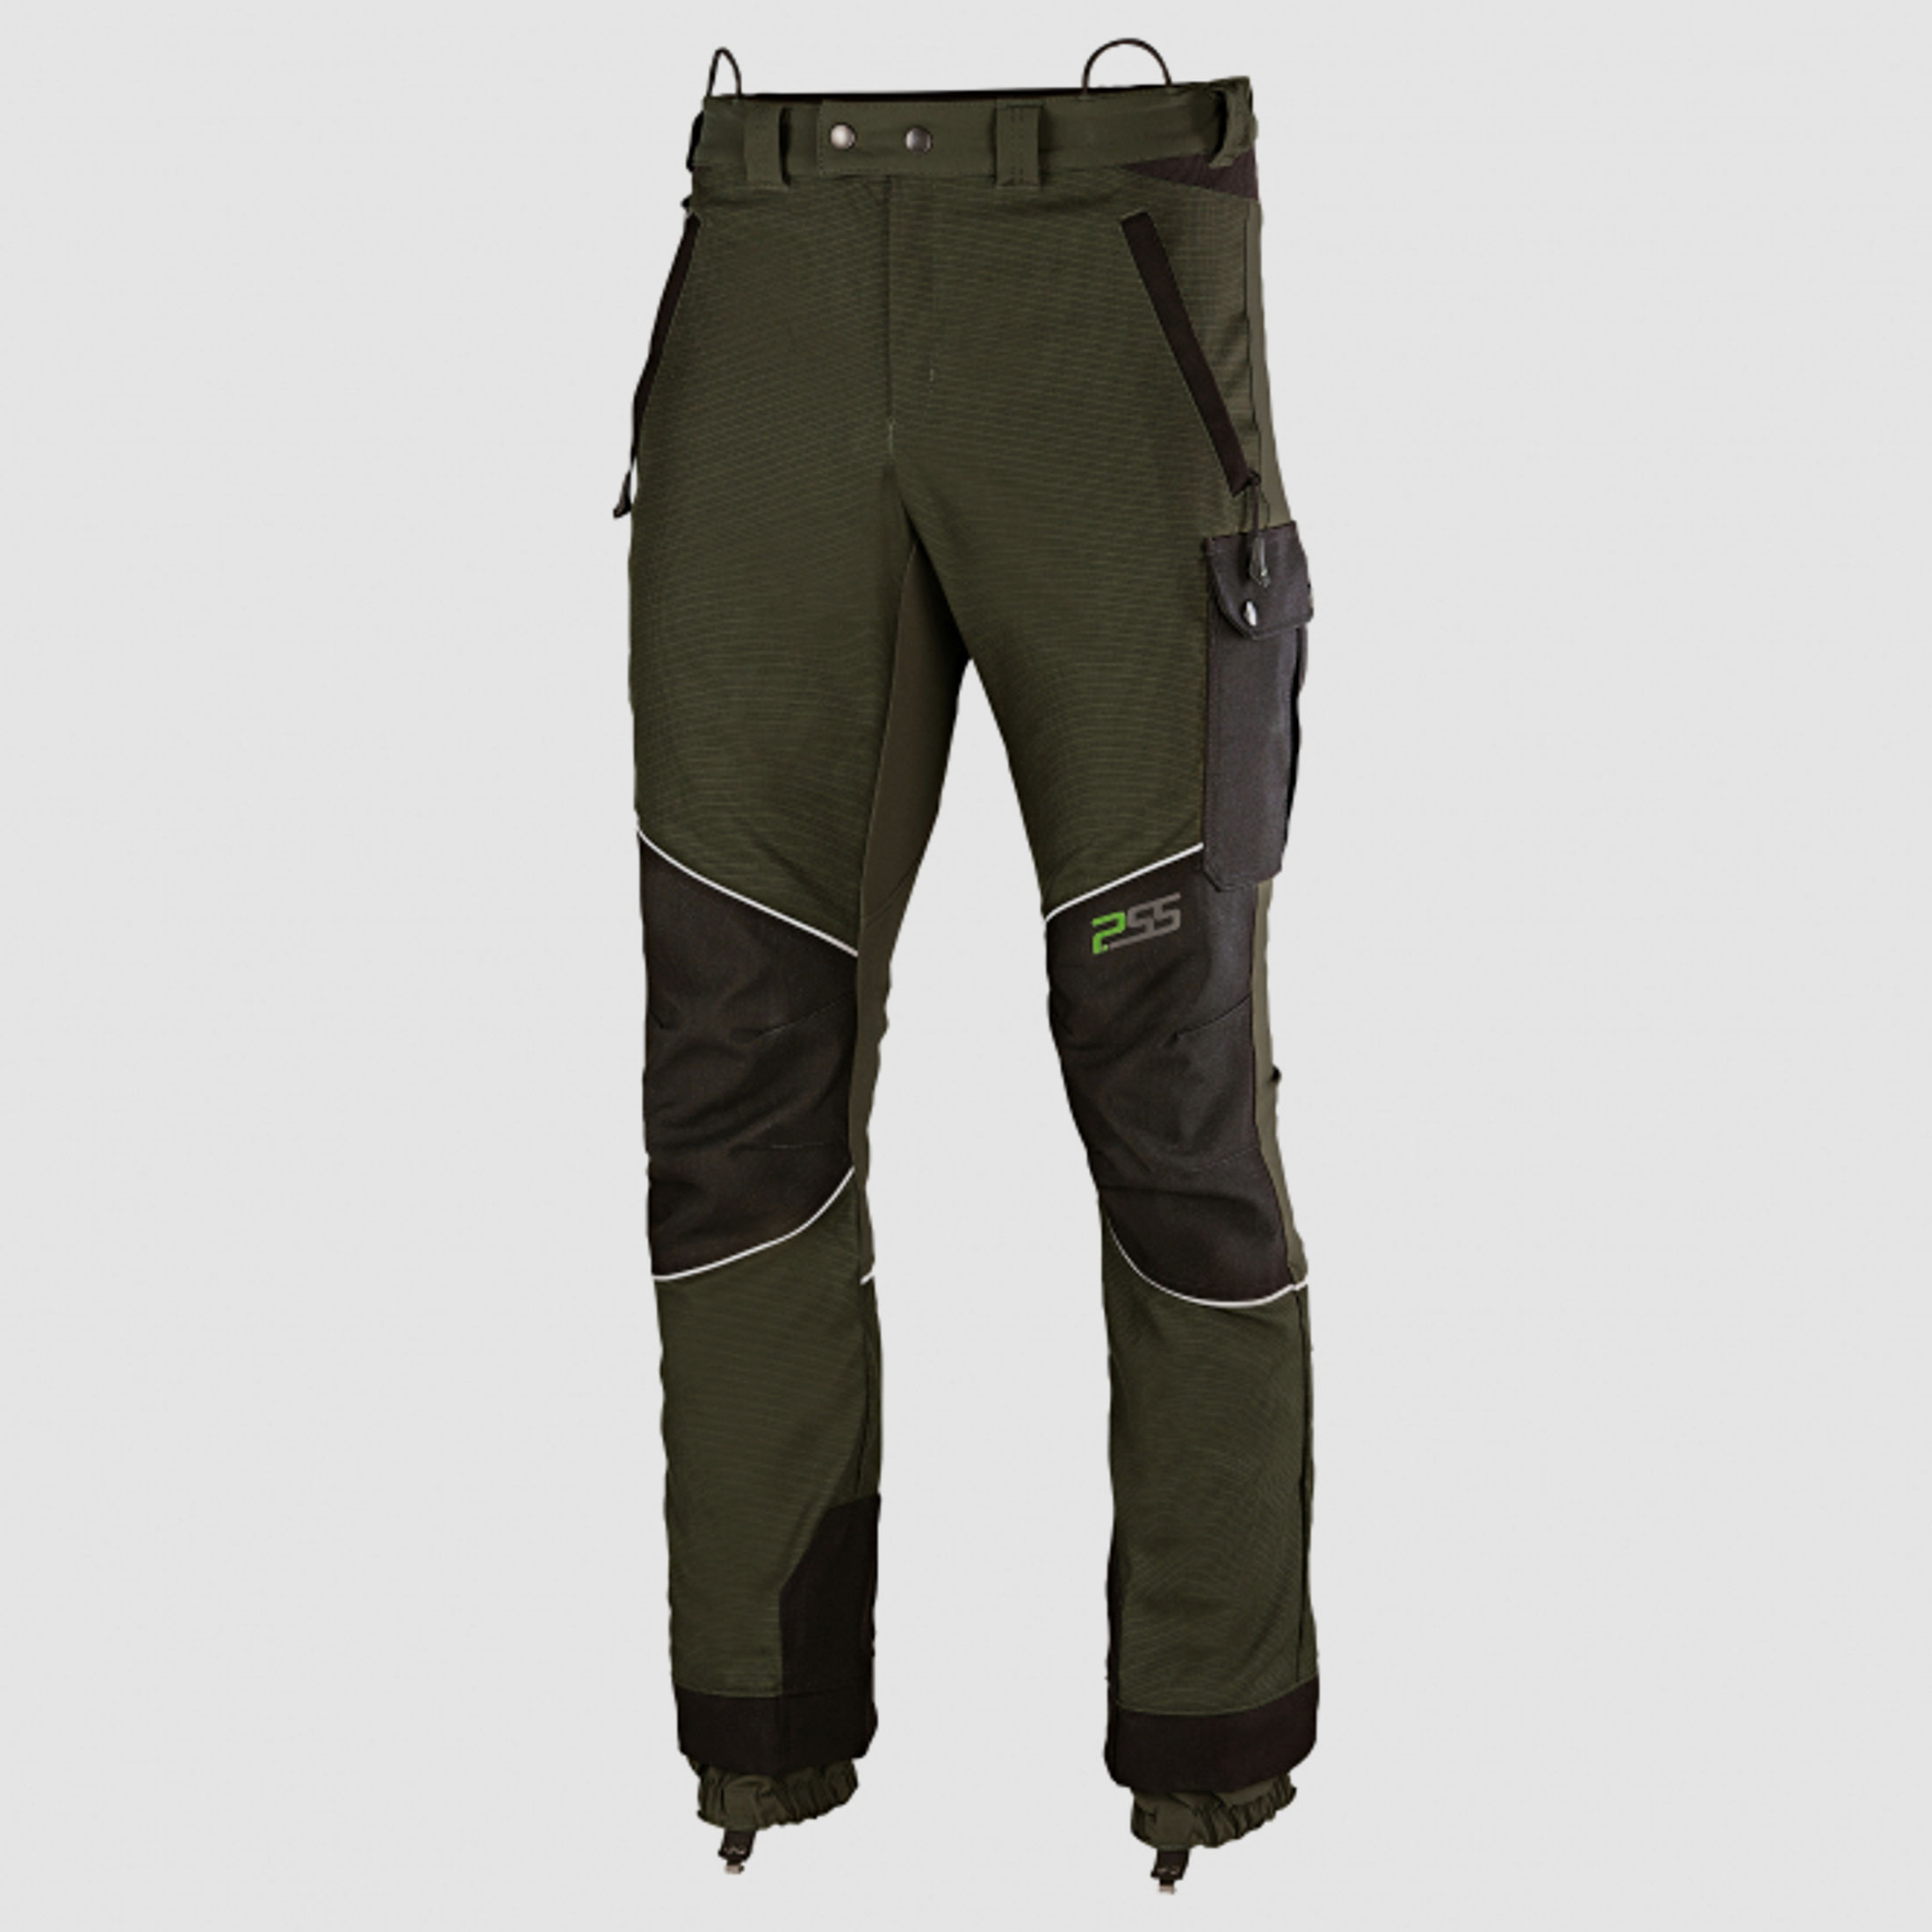 PSS       PSS   Herren Outdoorhose Robust ohne Membran